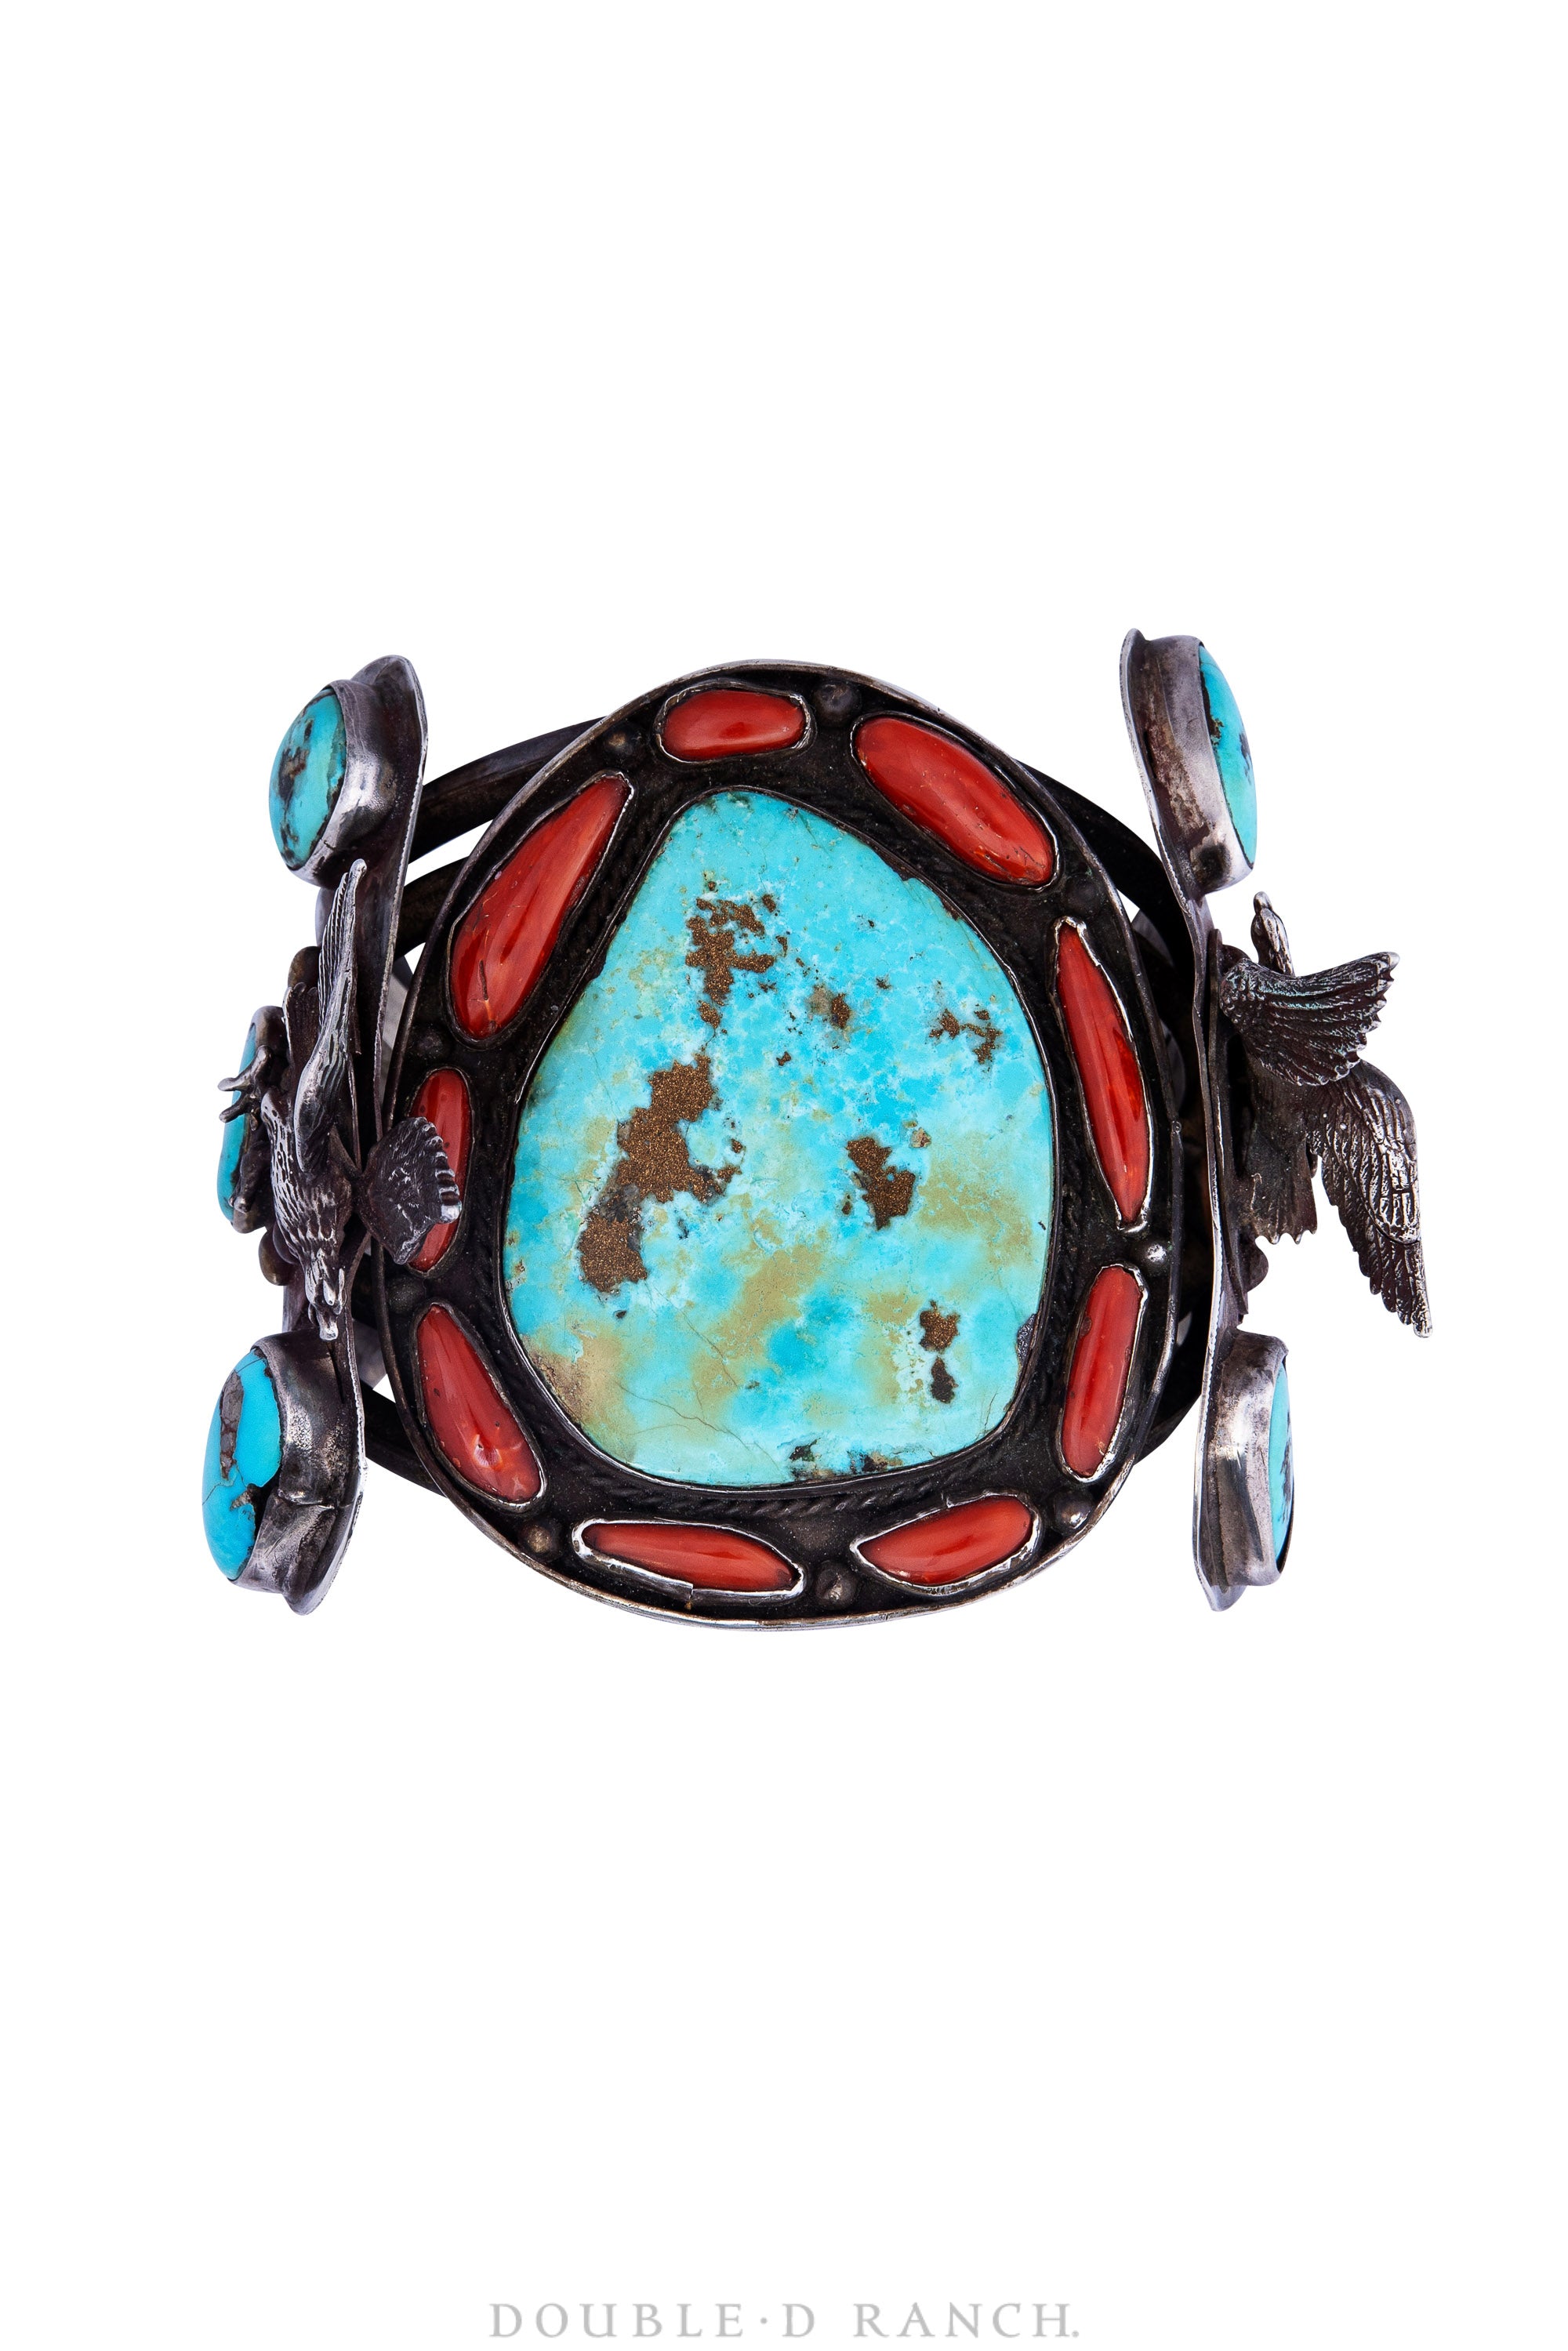 Cuff, Turquoise & Coral with Dimensional Eagles on Sides, Old Pawn, Vintage, 3083